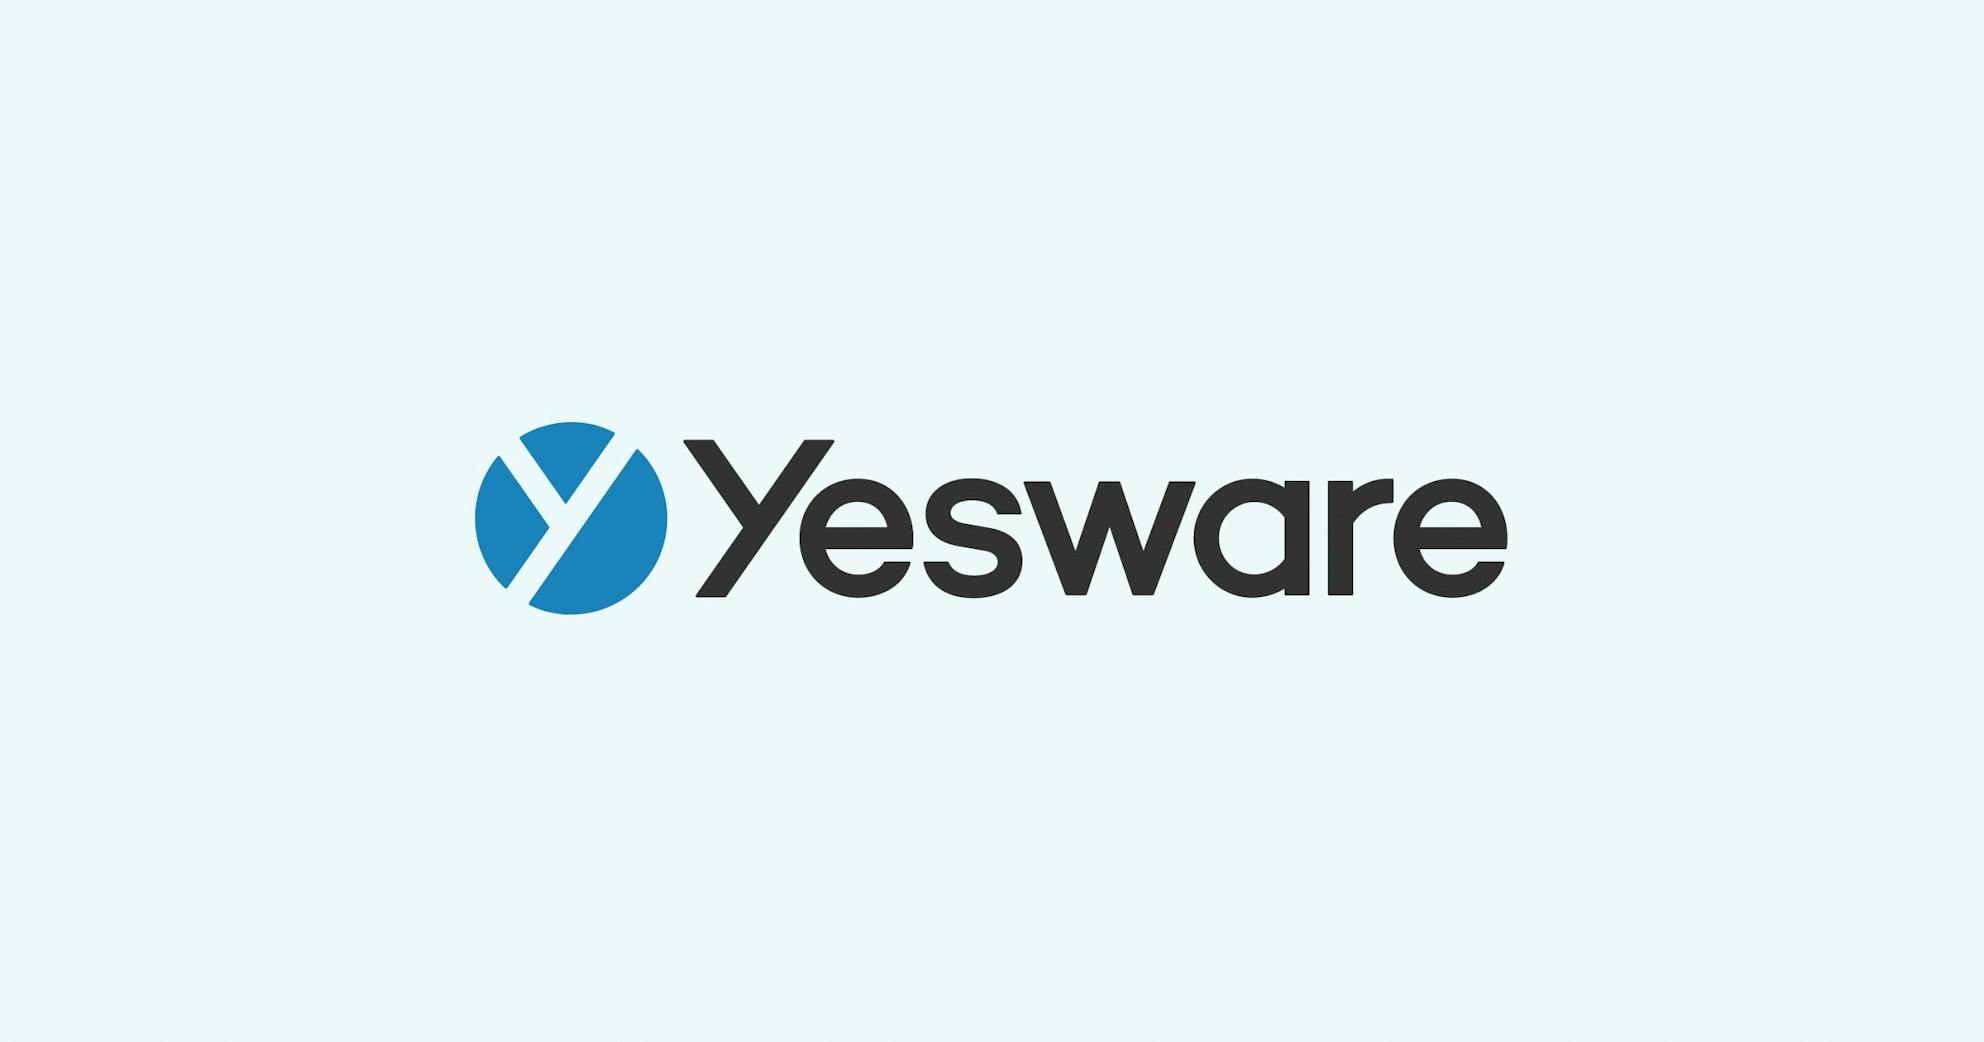 Yesware Takes Silver For "Top Sales Productivity Tool"